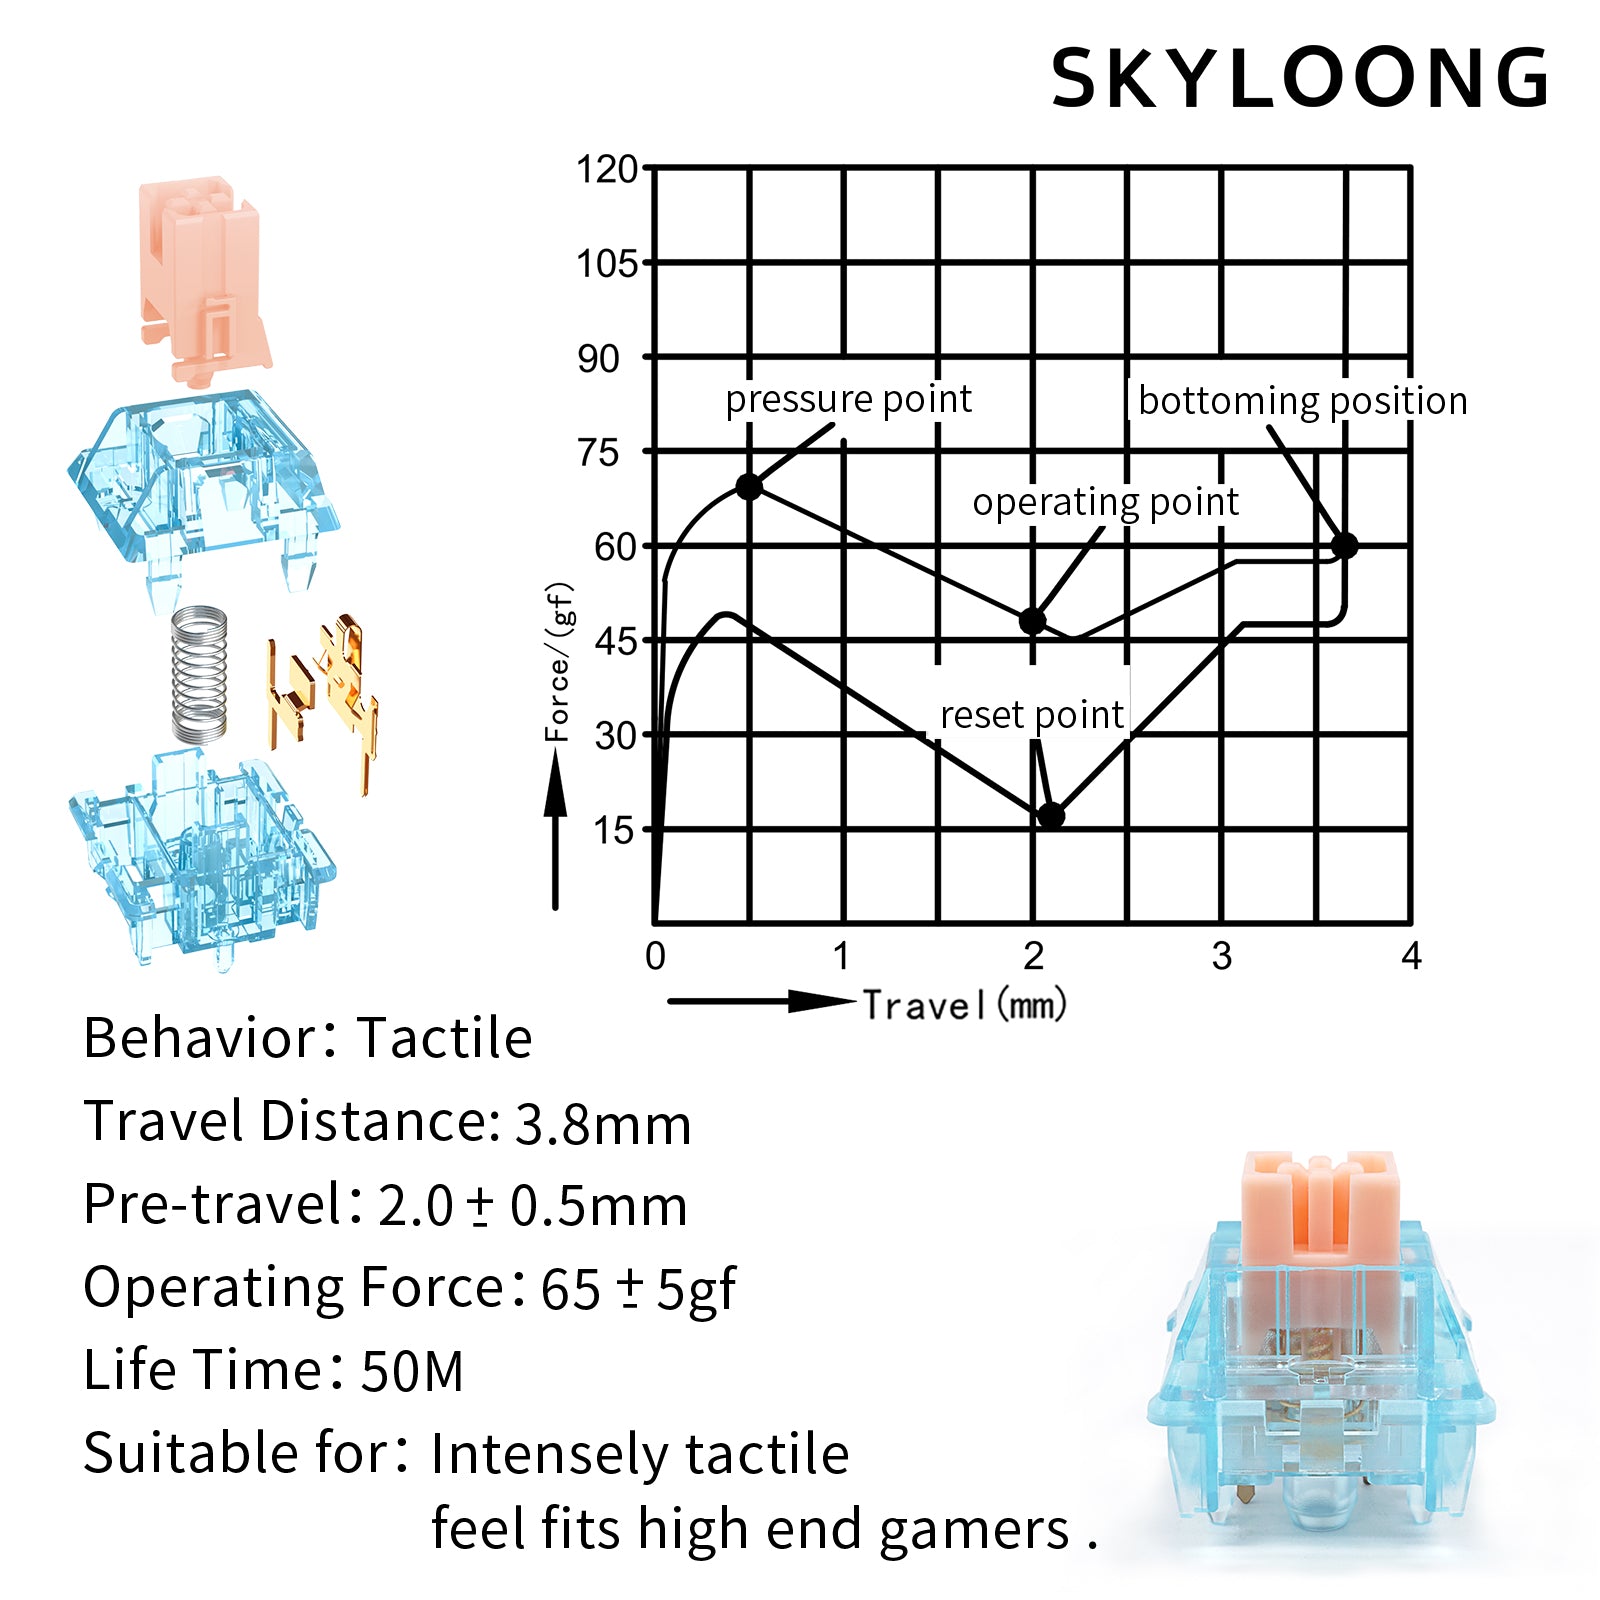 SKYLOONG Glacier Switch Silent Series-Chosfox